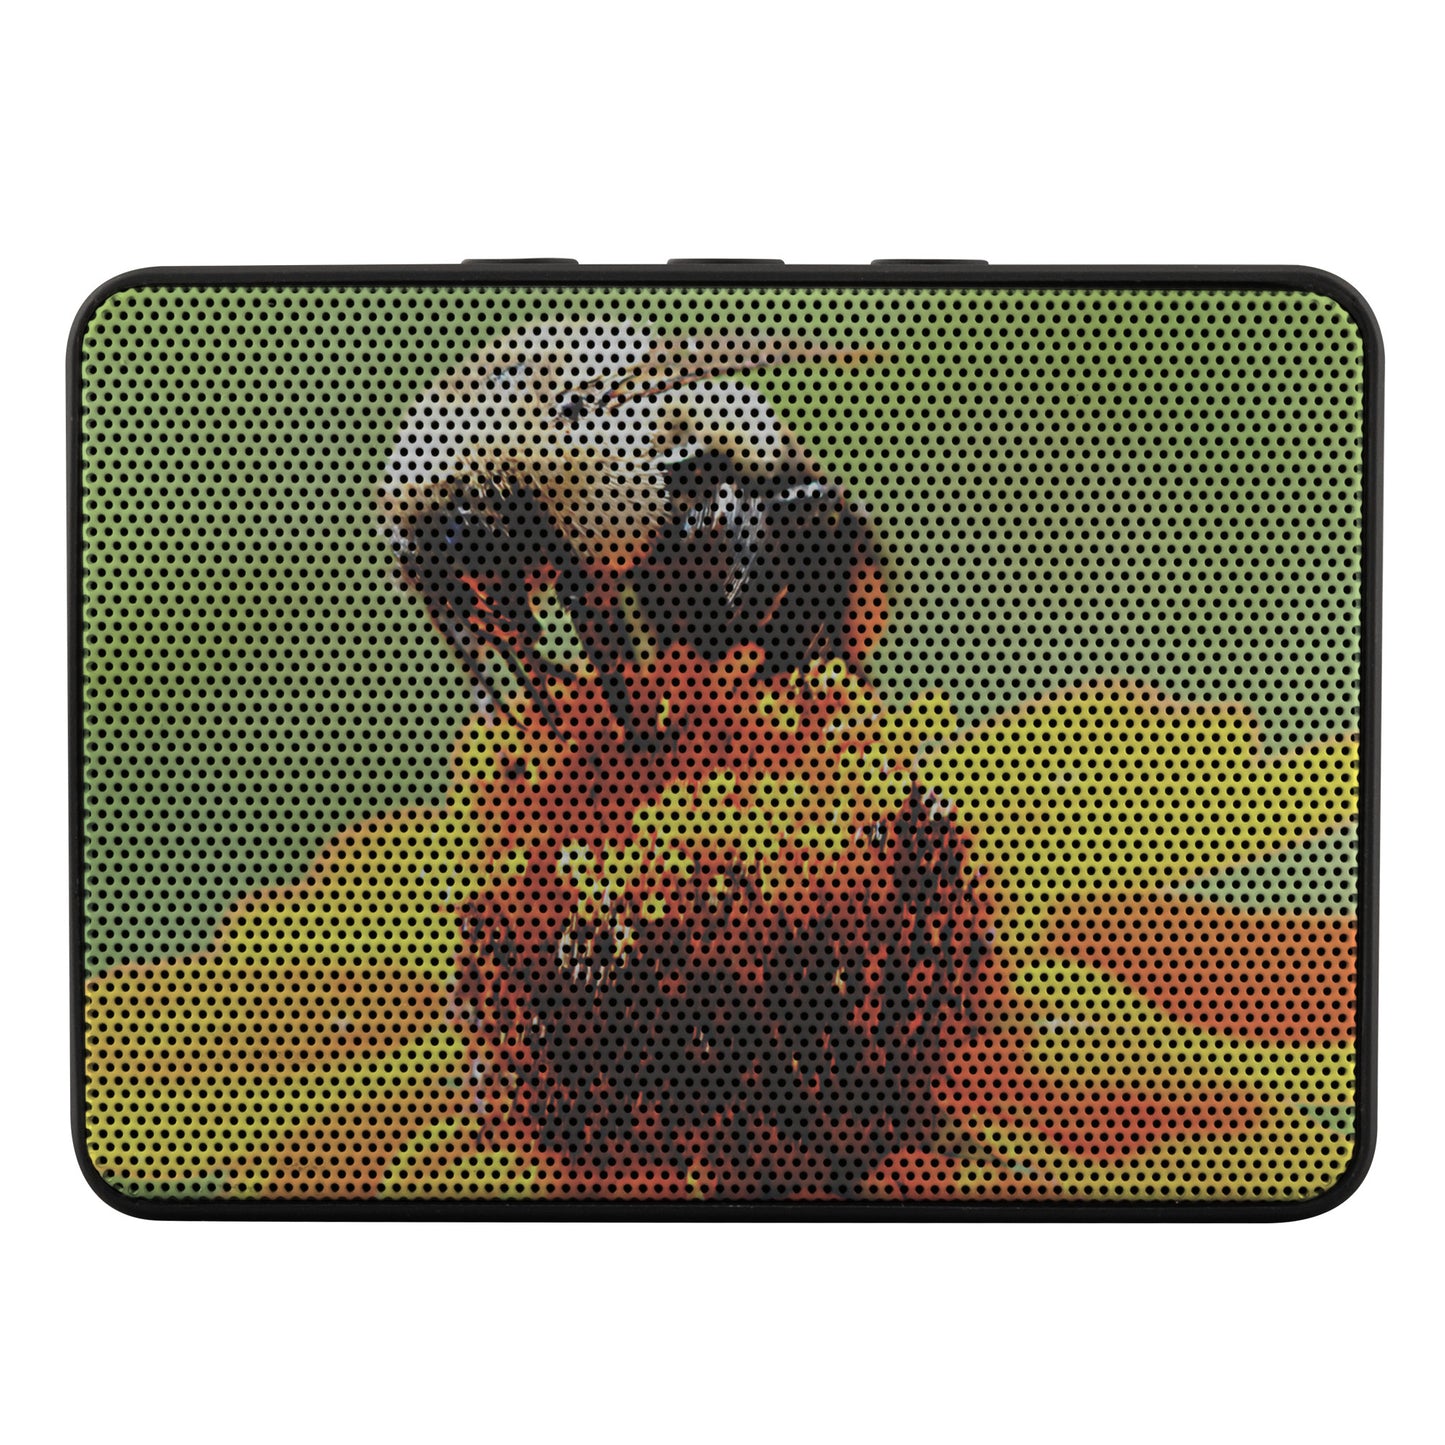 Bee on a Flower Boxanne Bluetooth Speakers